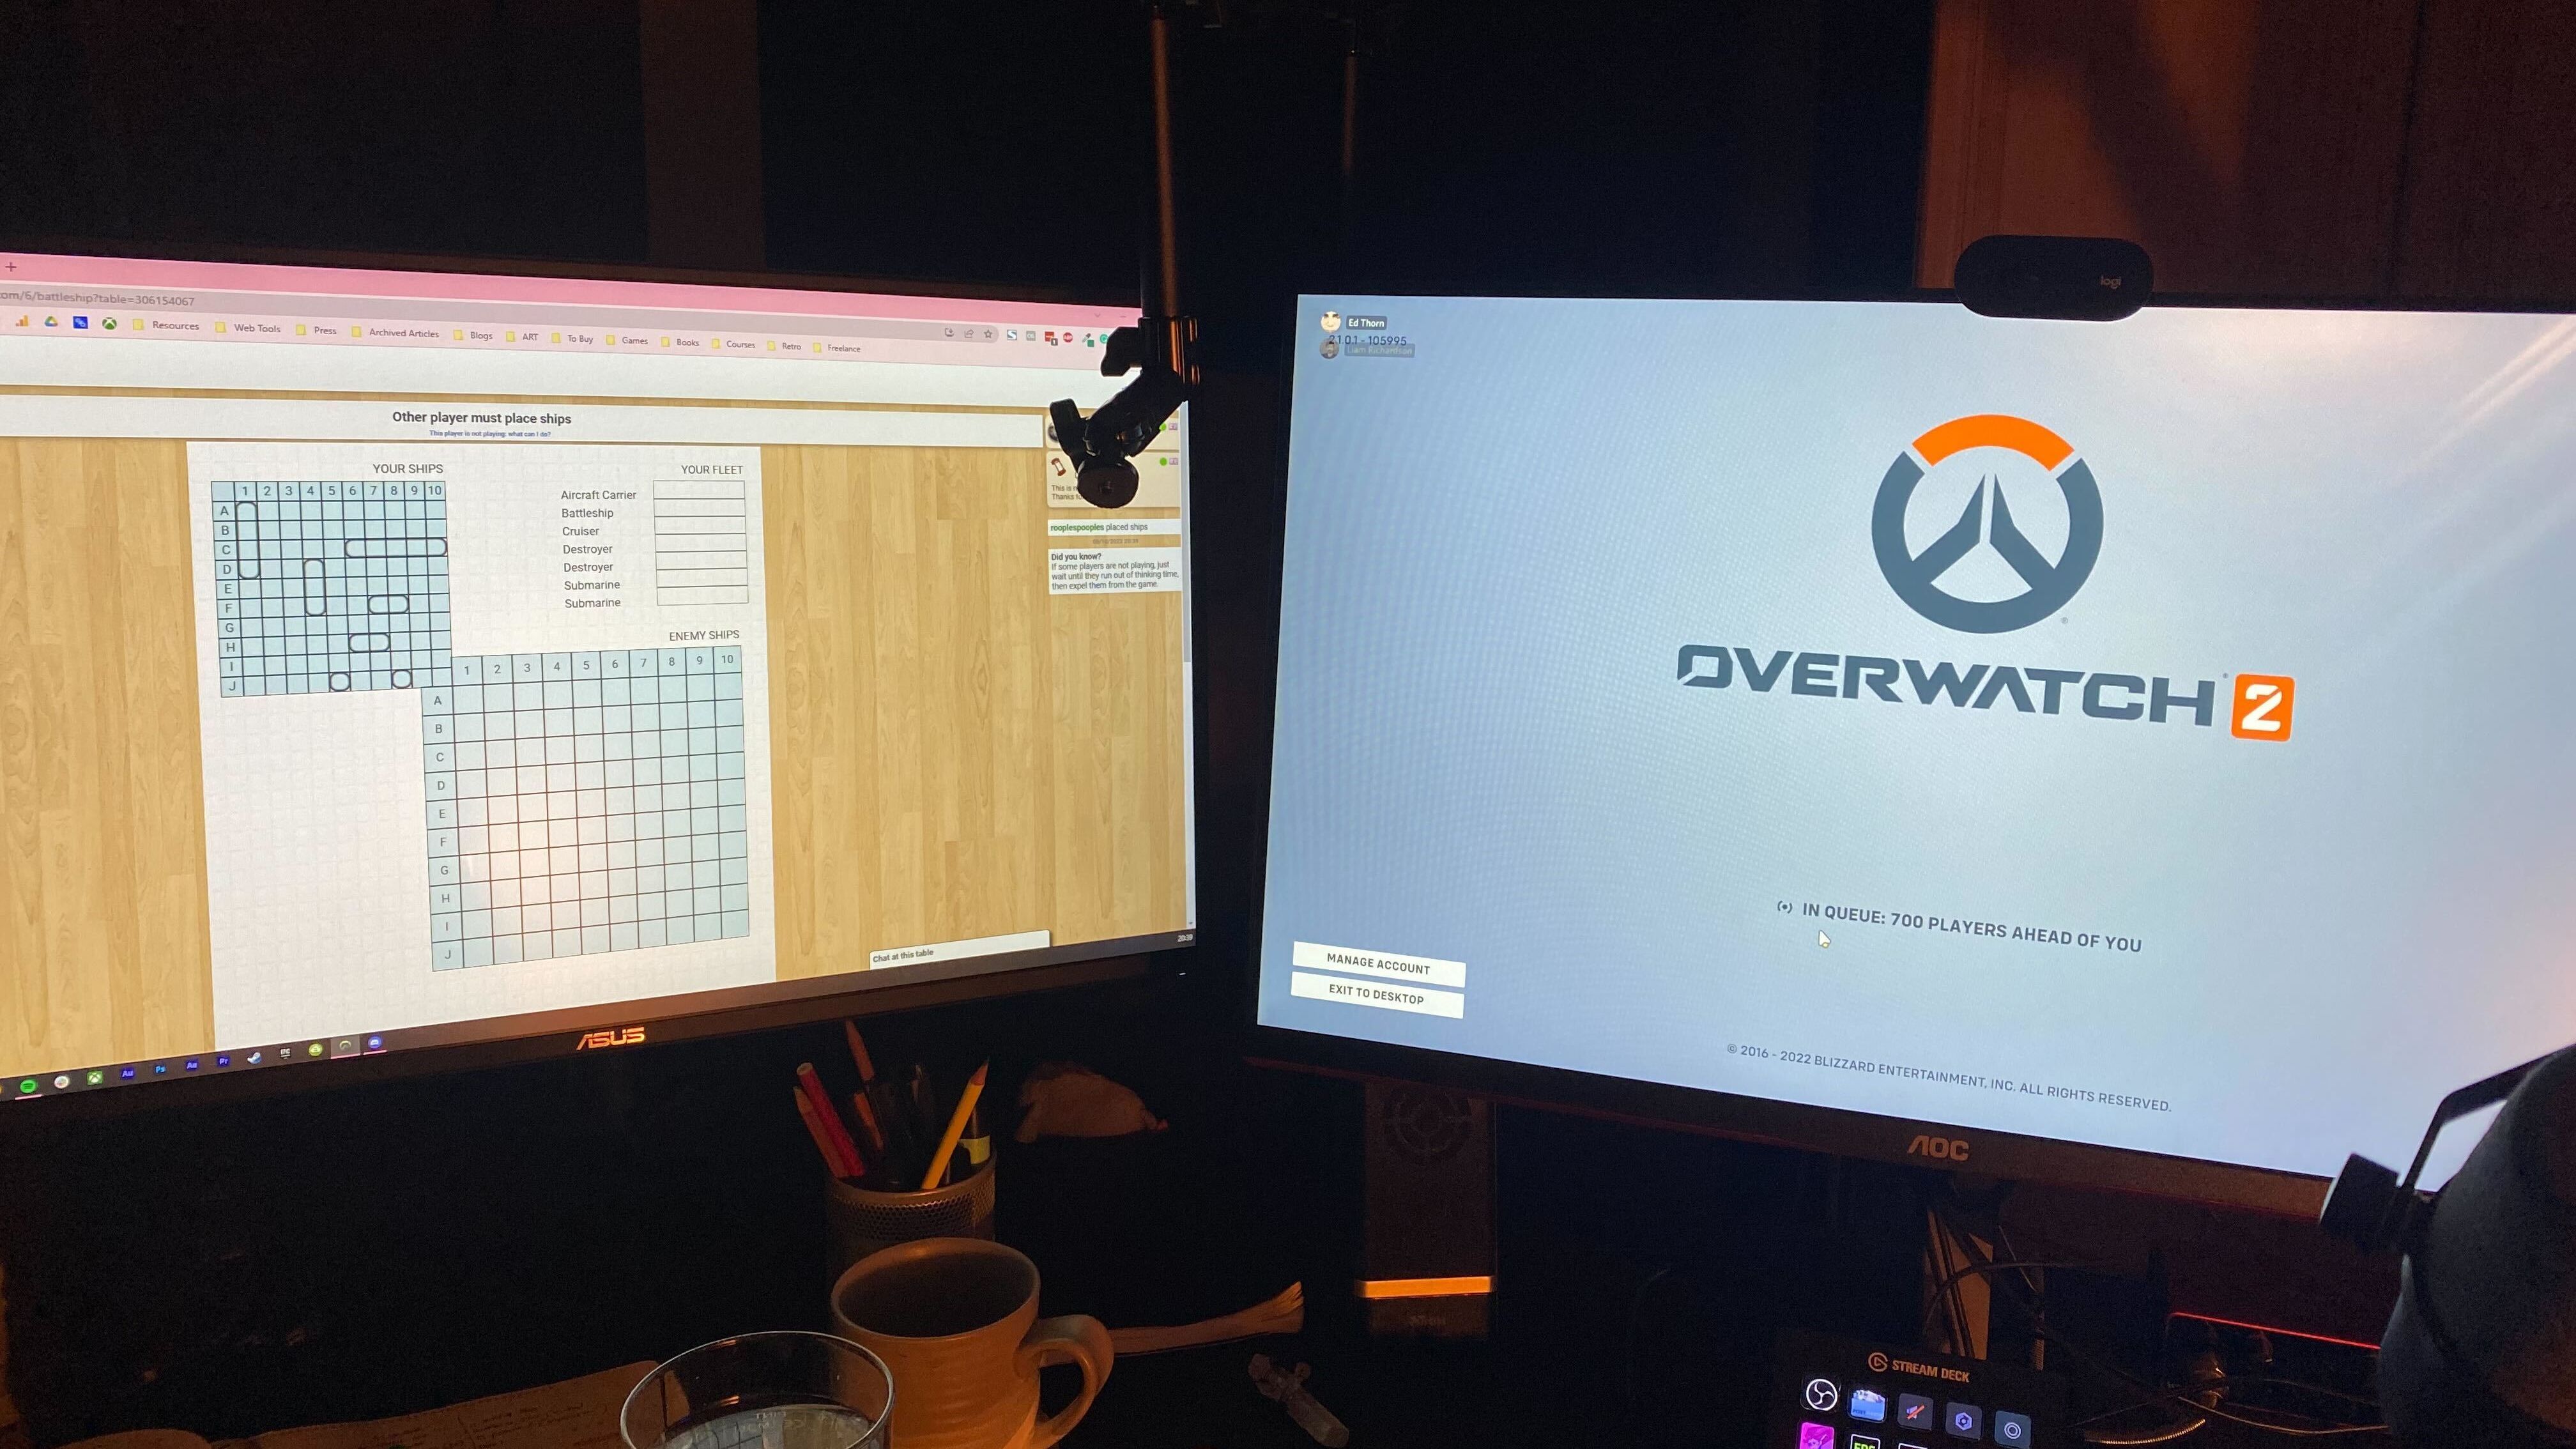 A photo of a desk with two PC monitors: one on the left queuing for Overwatch 2, the other playing a game of Battleship